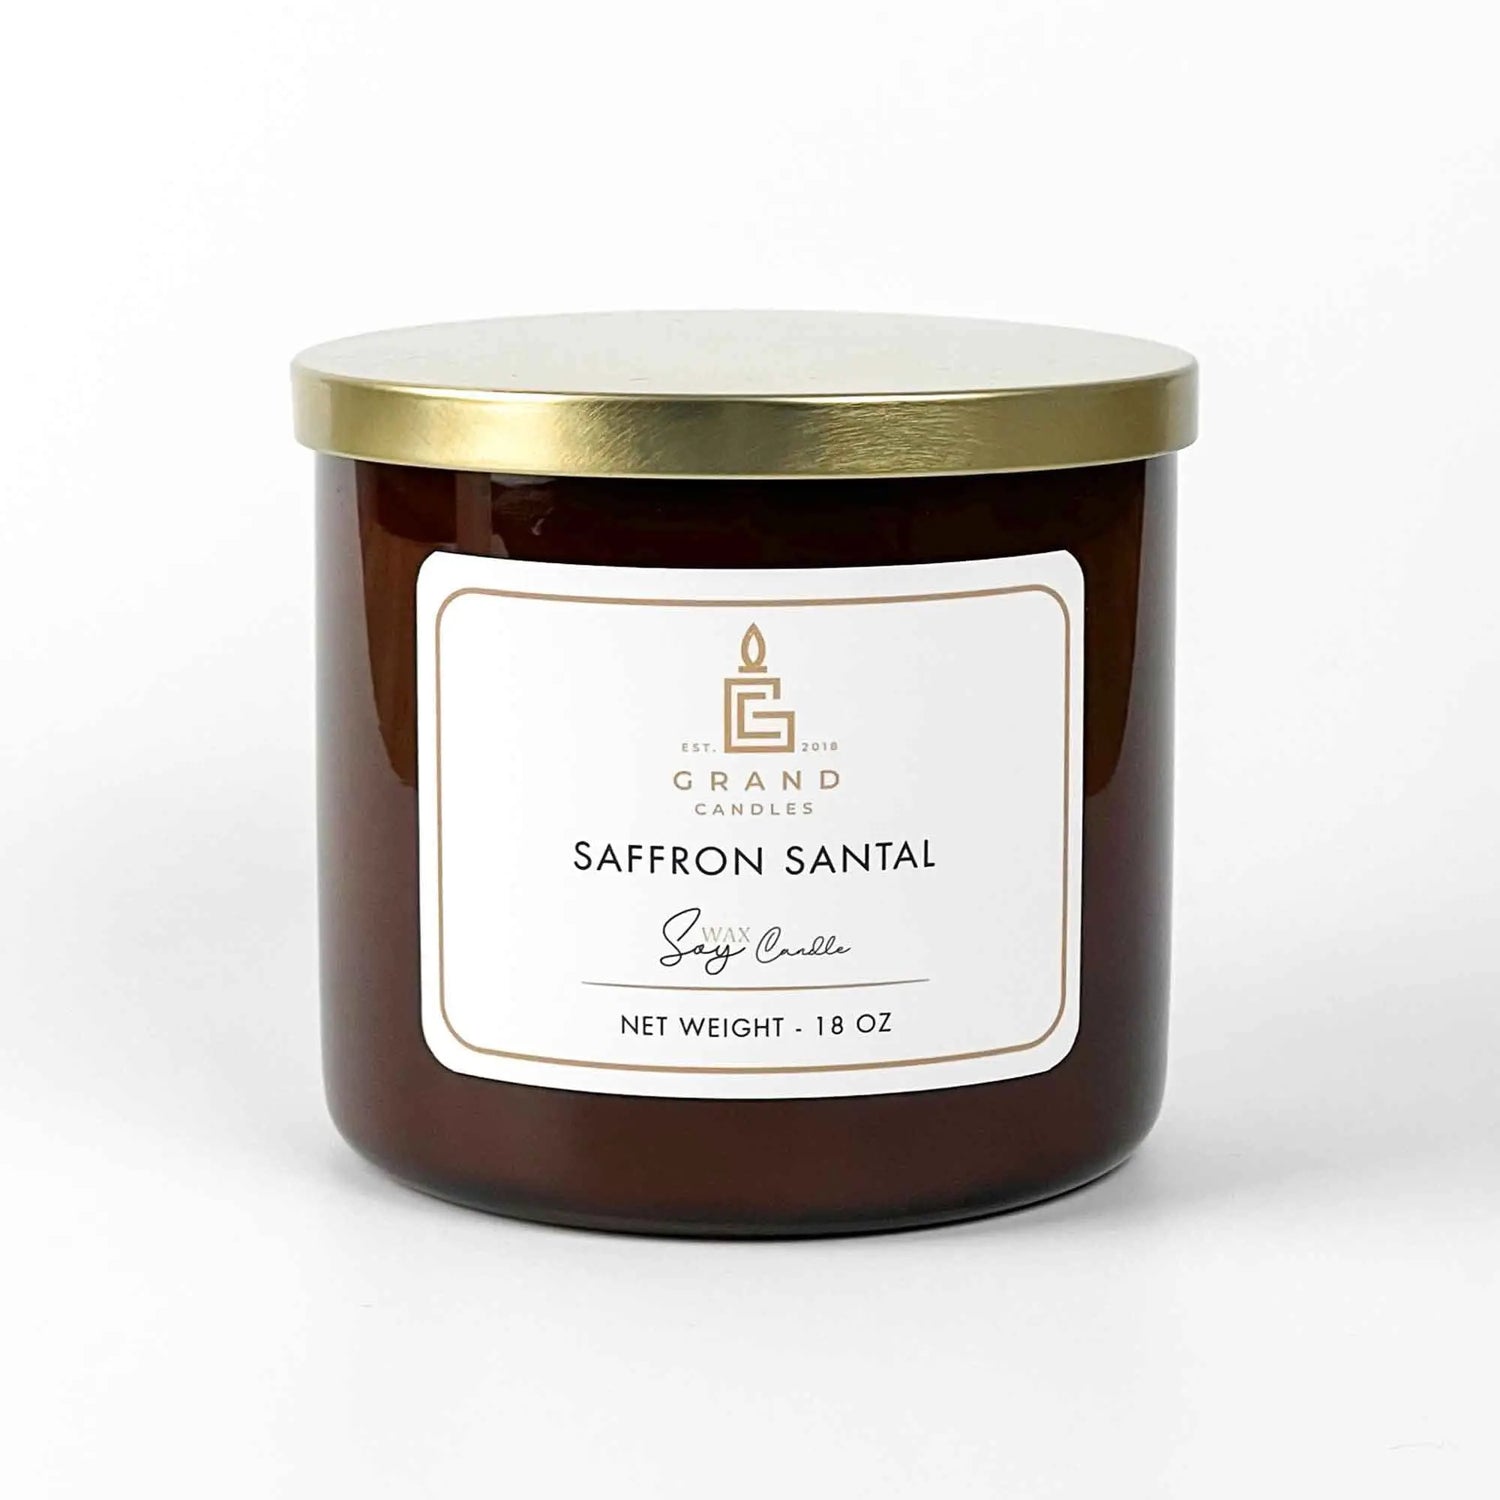 Scented Soy Wax Candle | Saffron Santal Soy Candle | Handcrafted Aromatherapy Home Fragrance